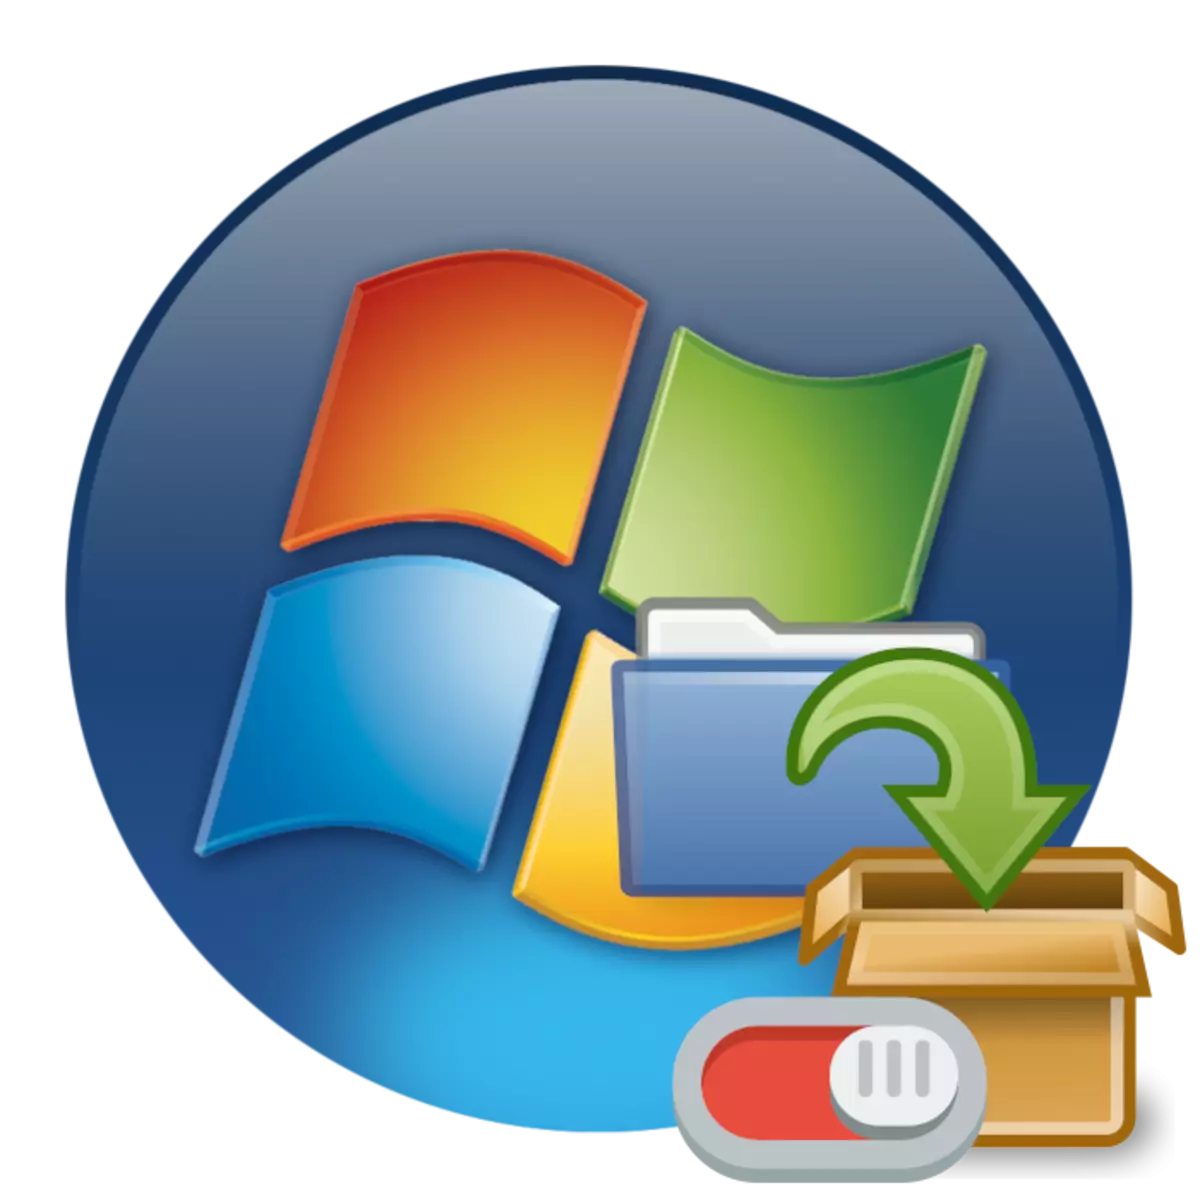 How to disable archiving in Windows 7 forever